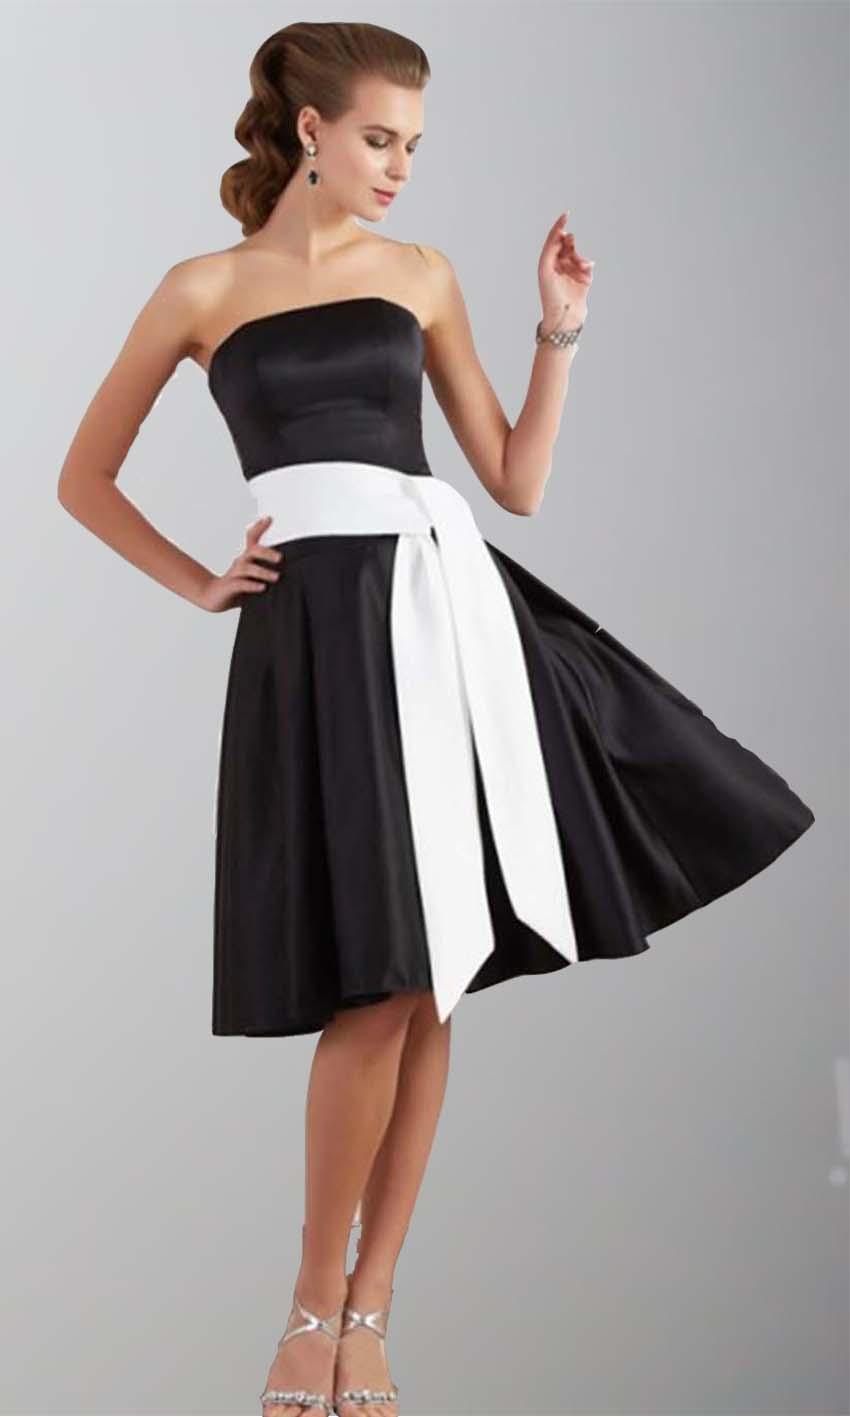 Wedding - Classic Black Strapless Short Bridesmaid Dresses KSP342 [KSP342] - £76.00 : Cheap Prom Dresses Uk, Bridesmaid Dresses, 2014 Prom & Evening Dresses, Look for cheap elegant prom dresses 2014, cocktail gowns, or dresses for special occasions? kissprom.co.uk 